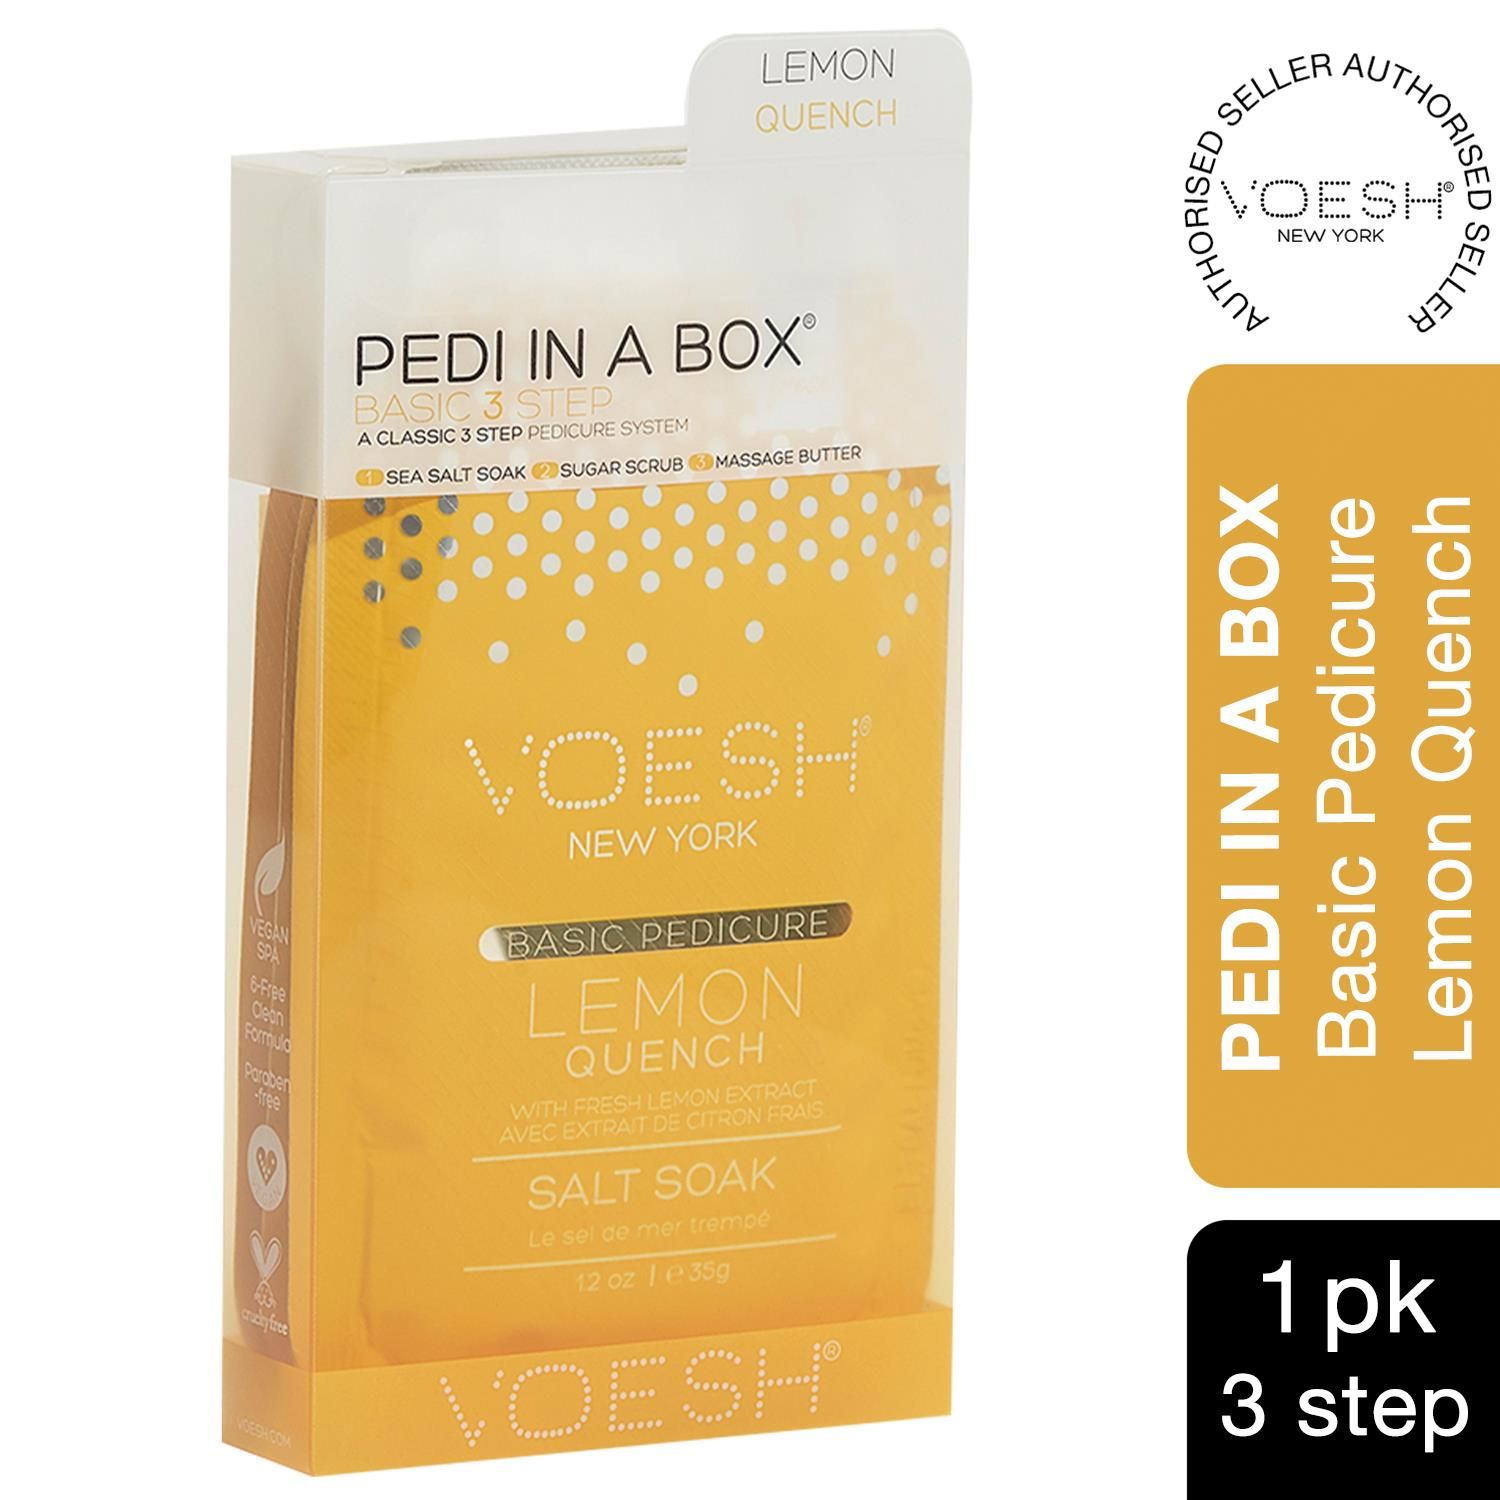 Voesh Lemon Basic 3 Step Pedicure In A Box with Vitamin C.  Voesh individual spa pedicure collection is a 3 step treatment. The cleanest and most hygienic Spa Pedicure solution. Enriched with key ingredients to give your feet the nutrition it needs. Each product is individually packed with the right amount for a single pedicure. Set Includes Sea Salt Soak, Scrub and Massage Cream.  

The Perfect Pedi For:
Everyday Pedicure Service
Clean & Hygienic Treatment

Key Features: 
The cleanest and most hygienic Spa Pedicure solution.
Enriched with key ingredients to give your feet the nutrition it needs.
Each product is individually packed with the right amount for a single pedicure.
Set Includes Sea Salt Soak, Scrub and Massage Cream.

This kit contains:
Sea Salt Soak 35g: This soak helps relieve tension, stiffness, minor aches and discomfort in your feet. It helps detox and deodorize the feet.
Sugar Scrub 35g: The scrub gently exfoliates dead skin cells and helps soften your feet. Perfect for use on the soles on your feet.
Massage Cream 35g: The massage cream hydrates and soothes skin. It softens the soles of your feet and helps prevent dryness and roughness.